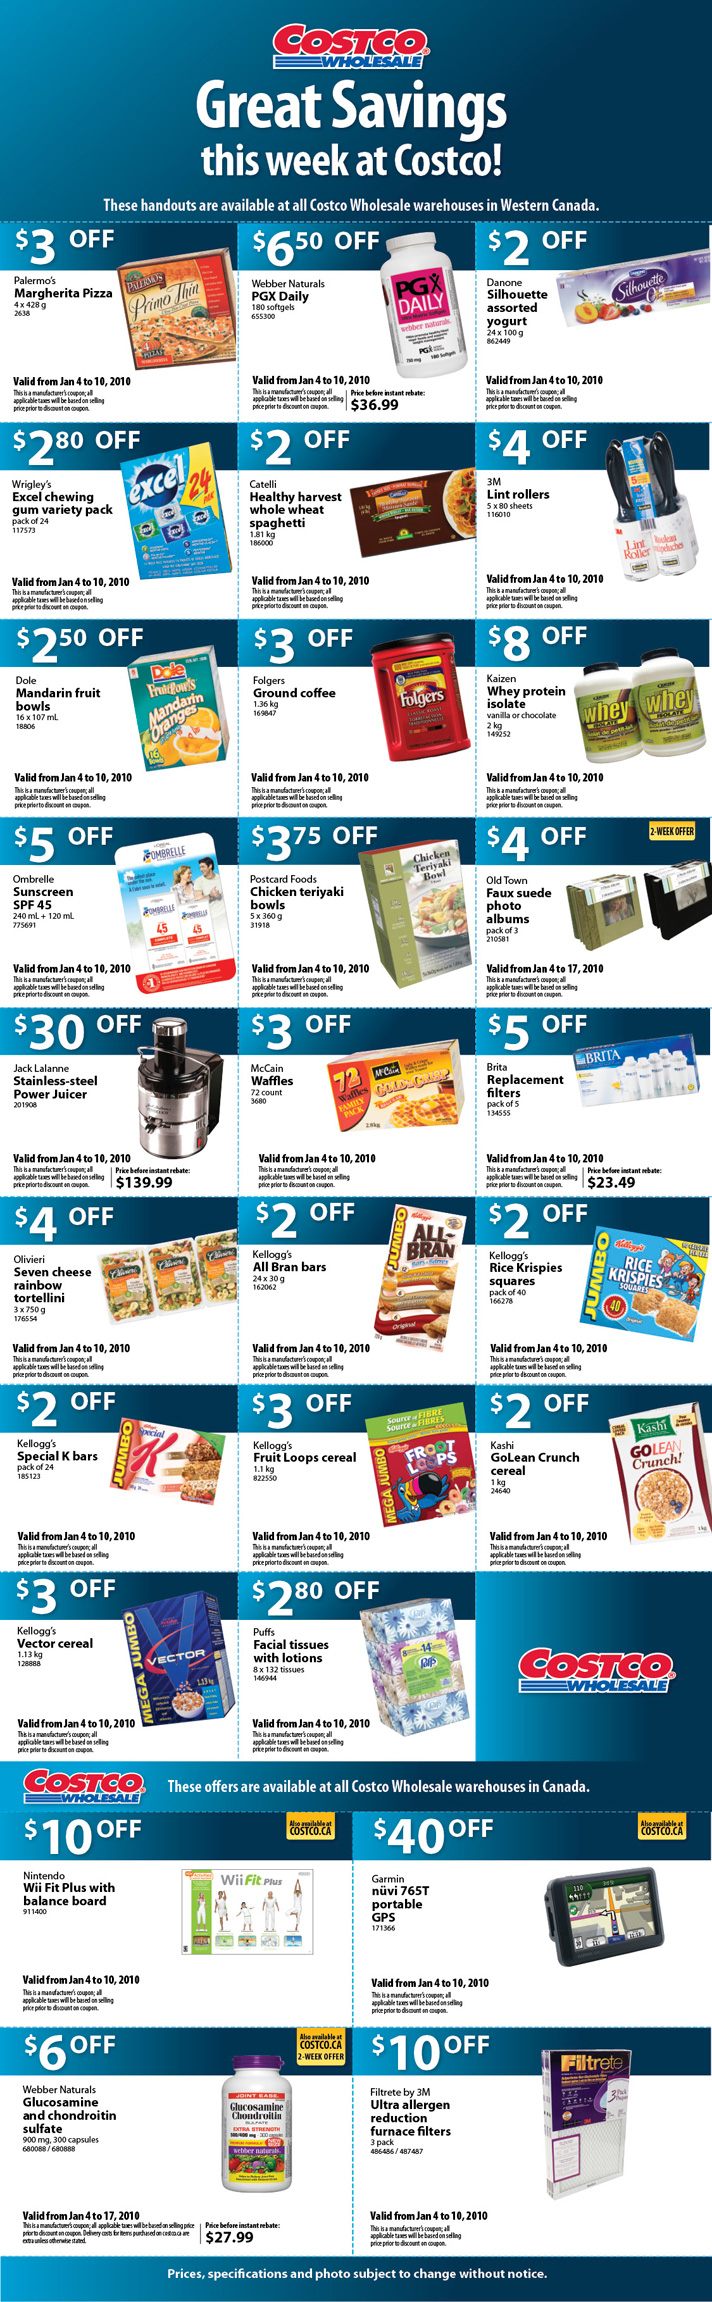 canadian-coupons-this-week-s-costco-instant-savings-coupons-canadian